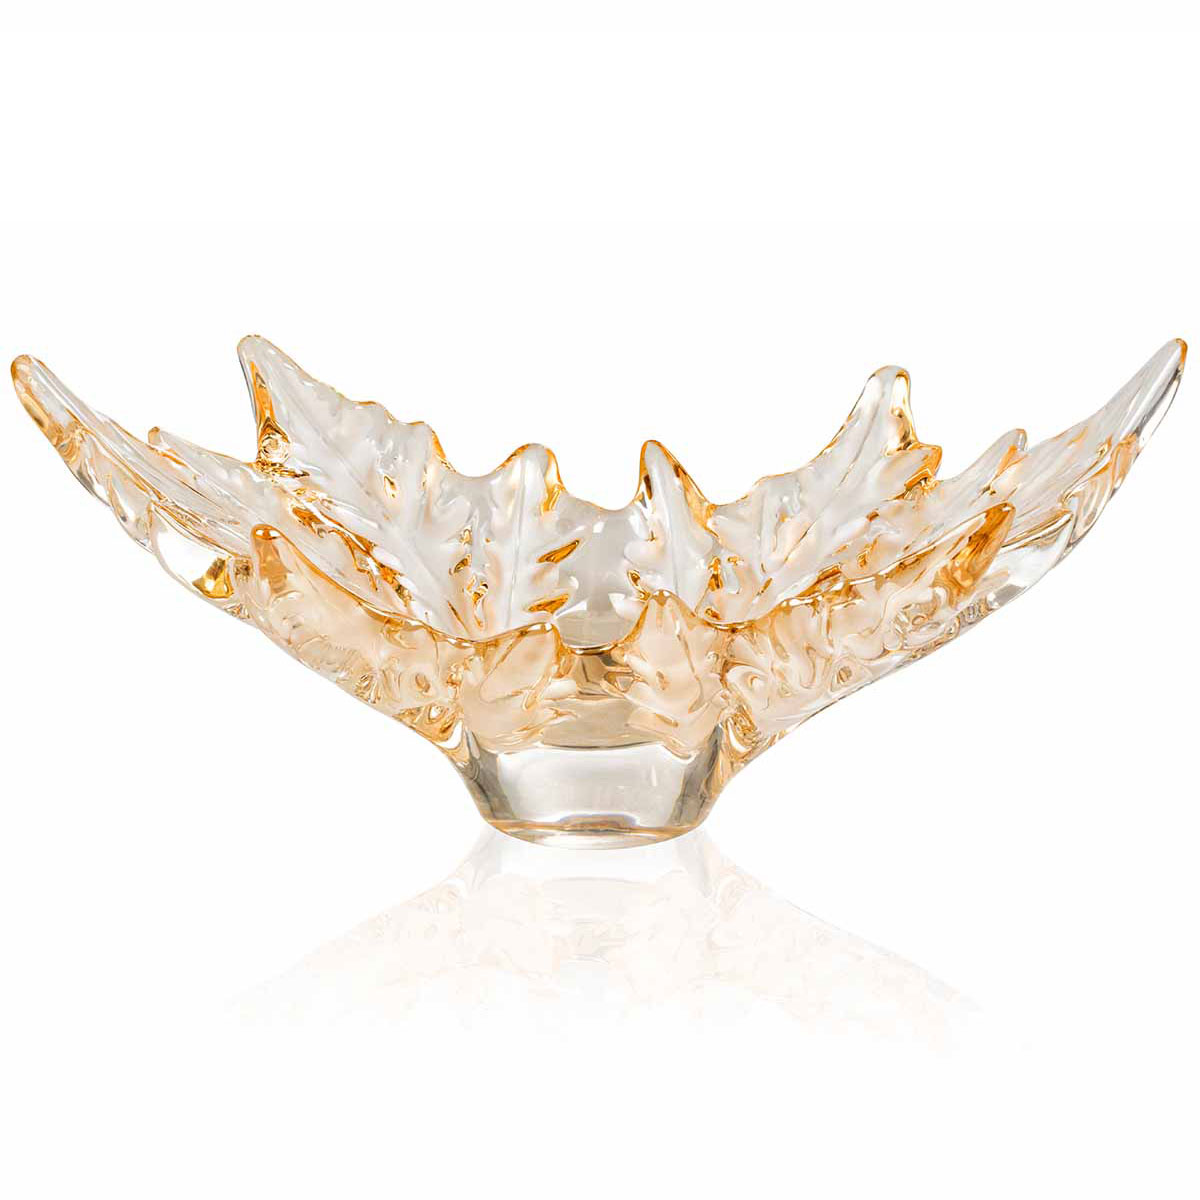 Lalique Champs Elysees 10" Bowl, Gold Luster